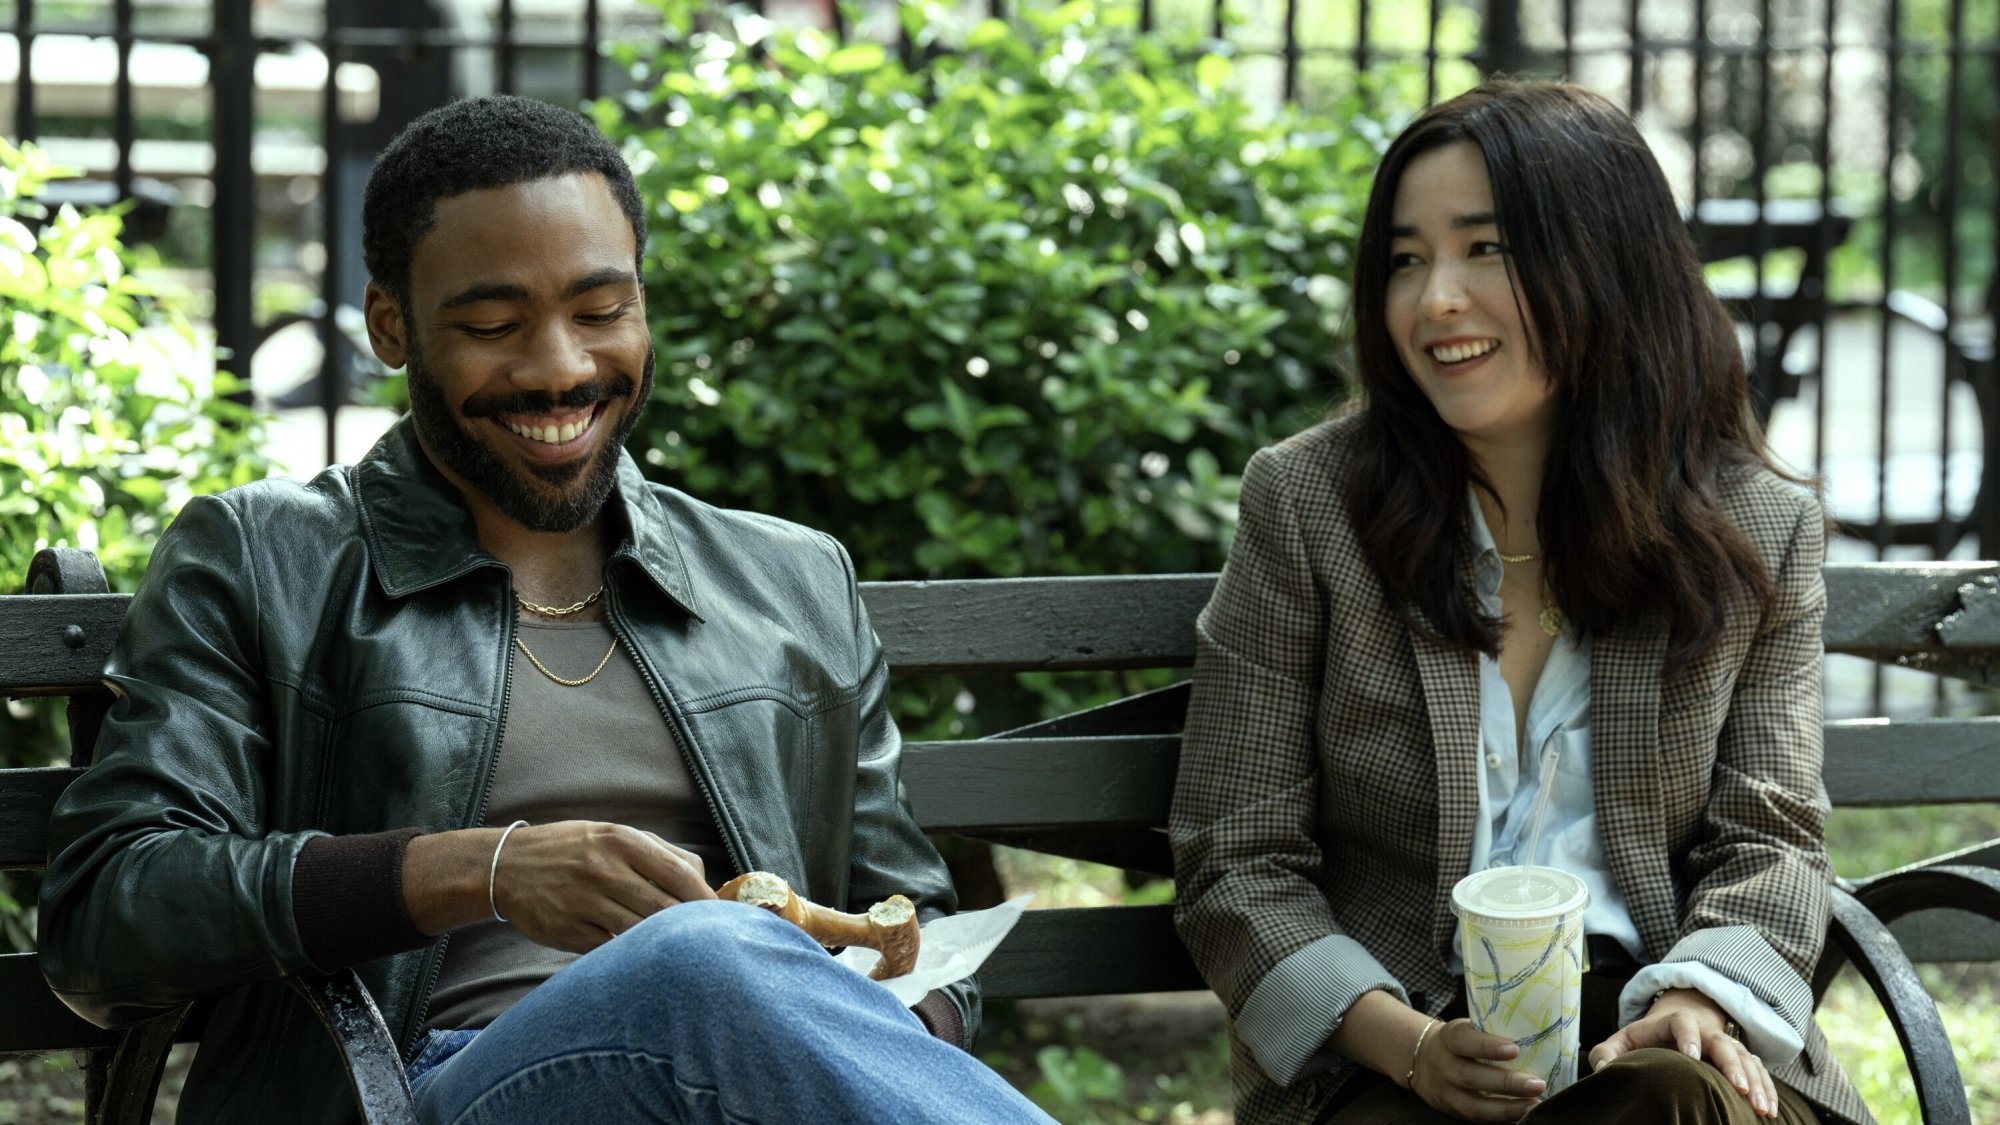 A man and woman laughing together on a park bench.